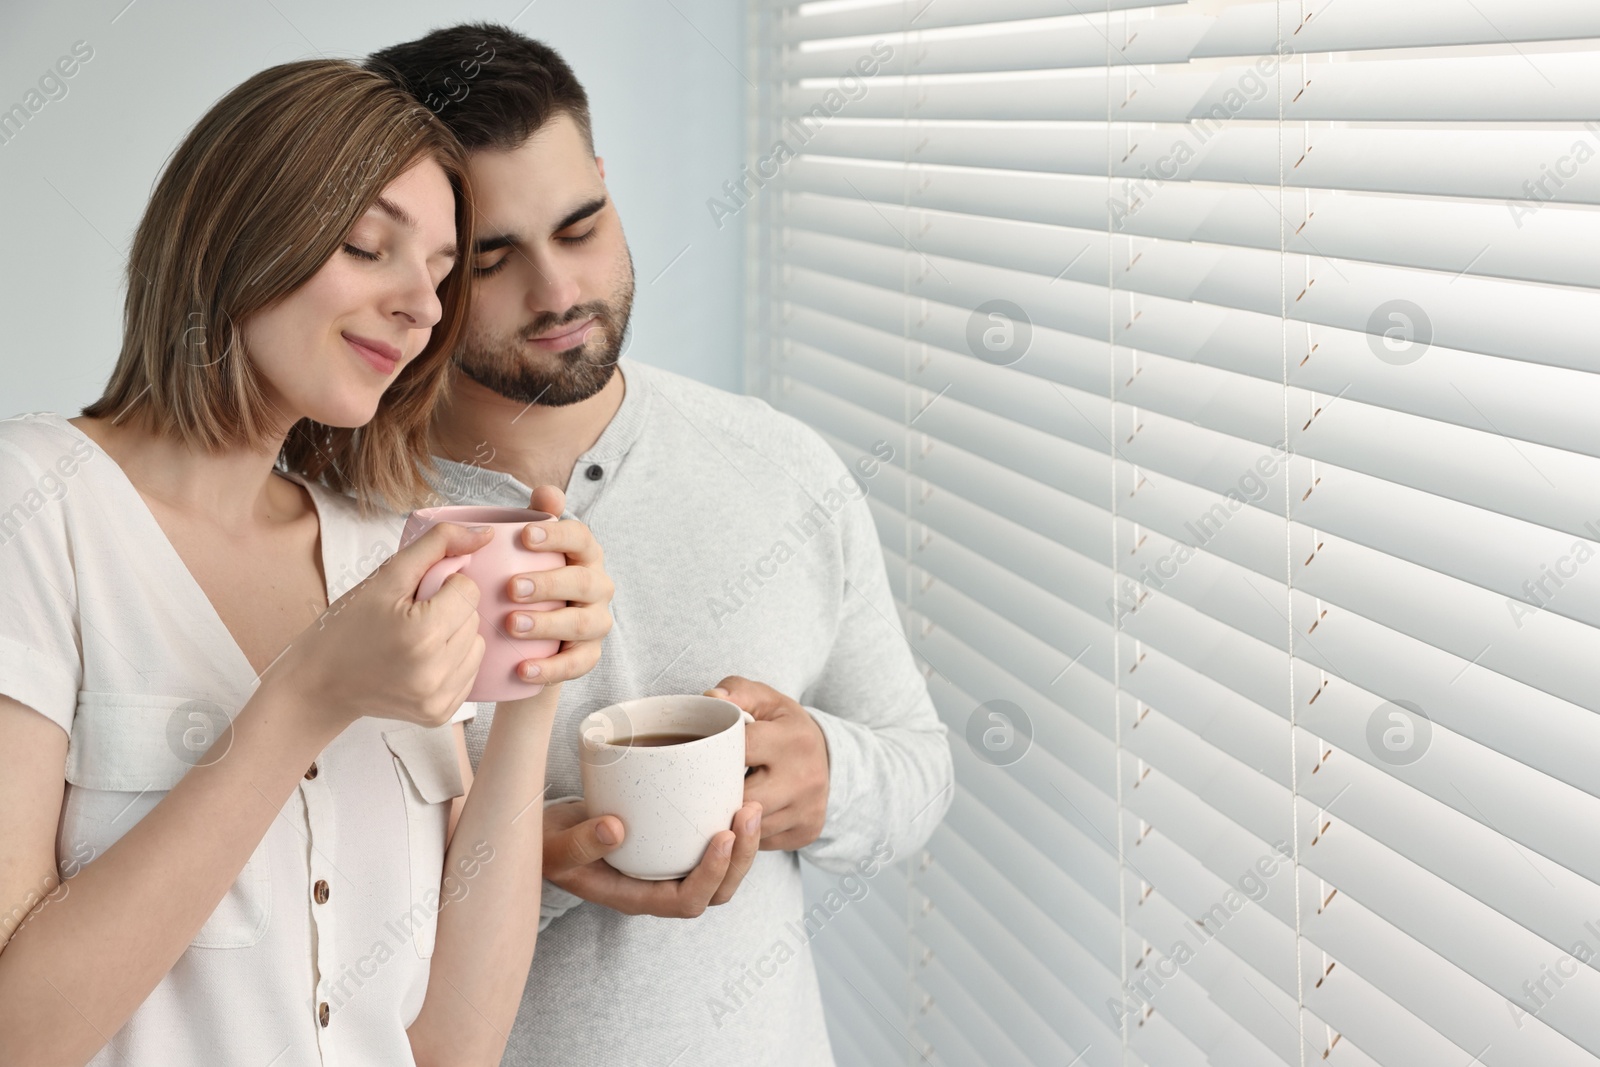 Photo of Couple with cups of drink near window blinds at home, space for text